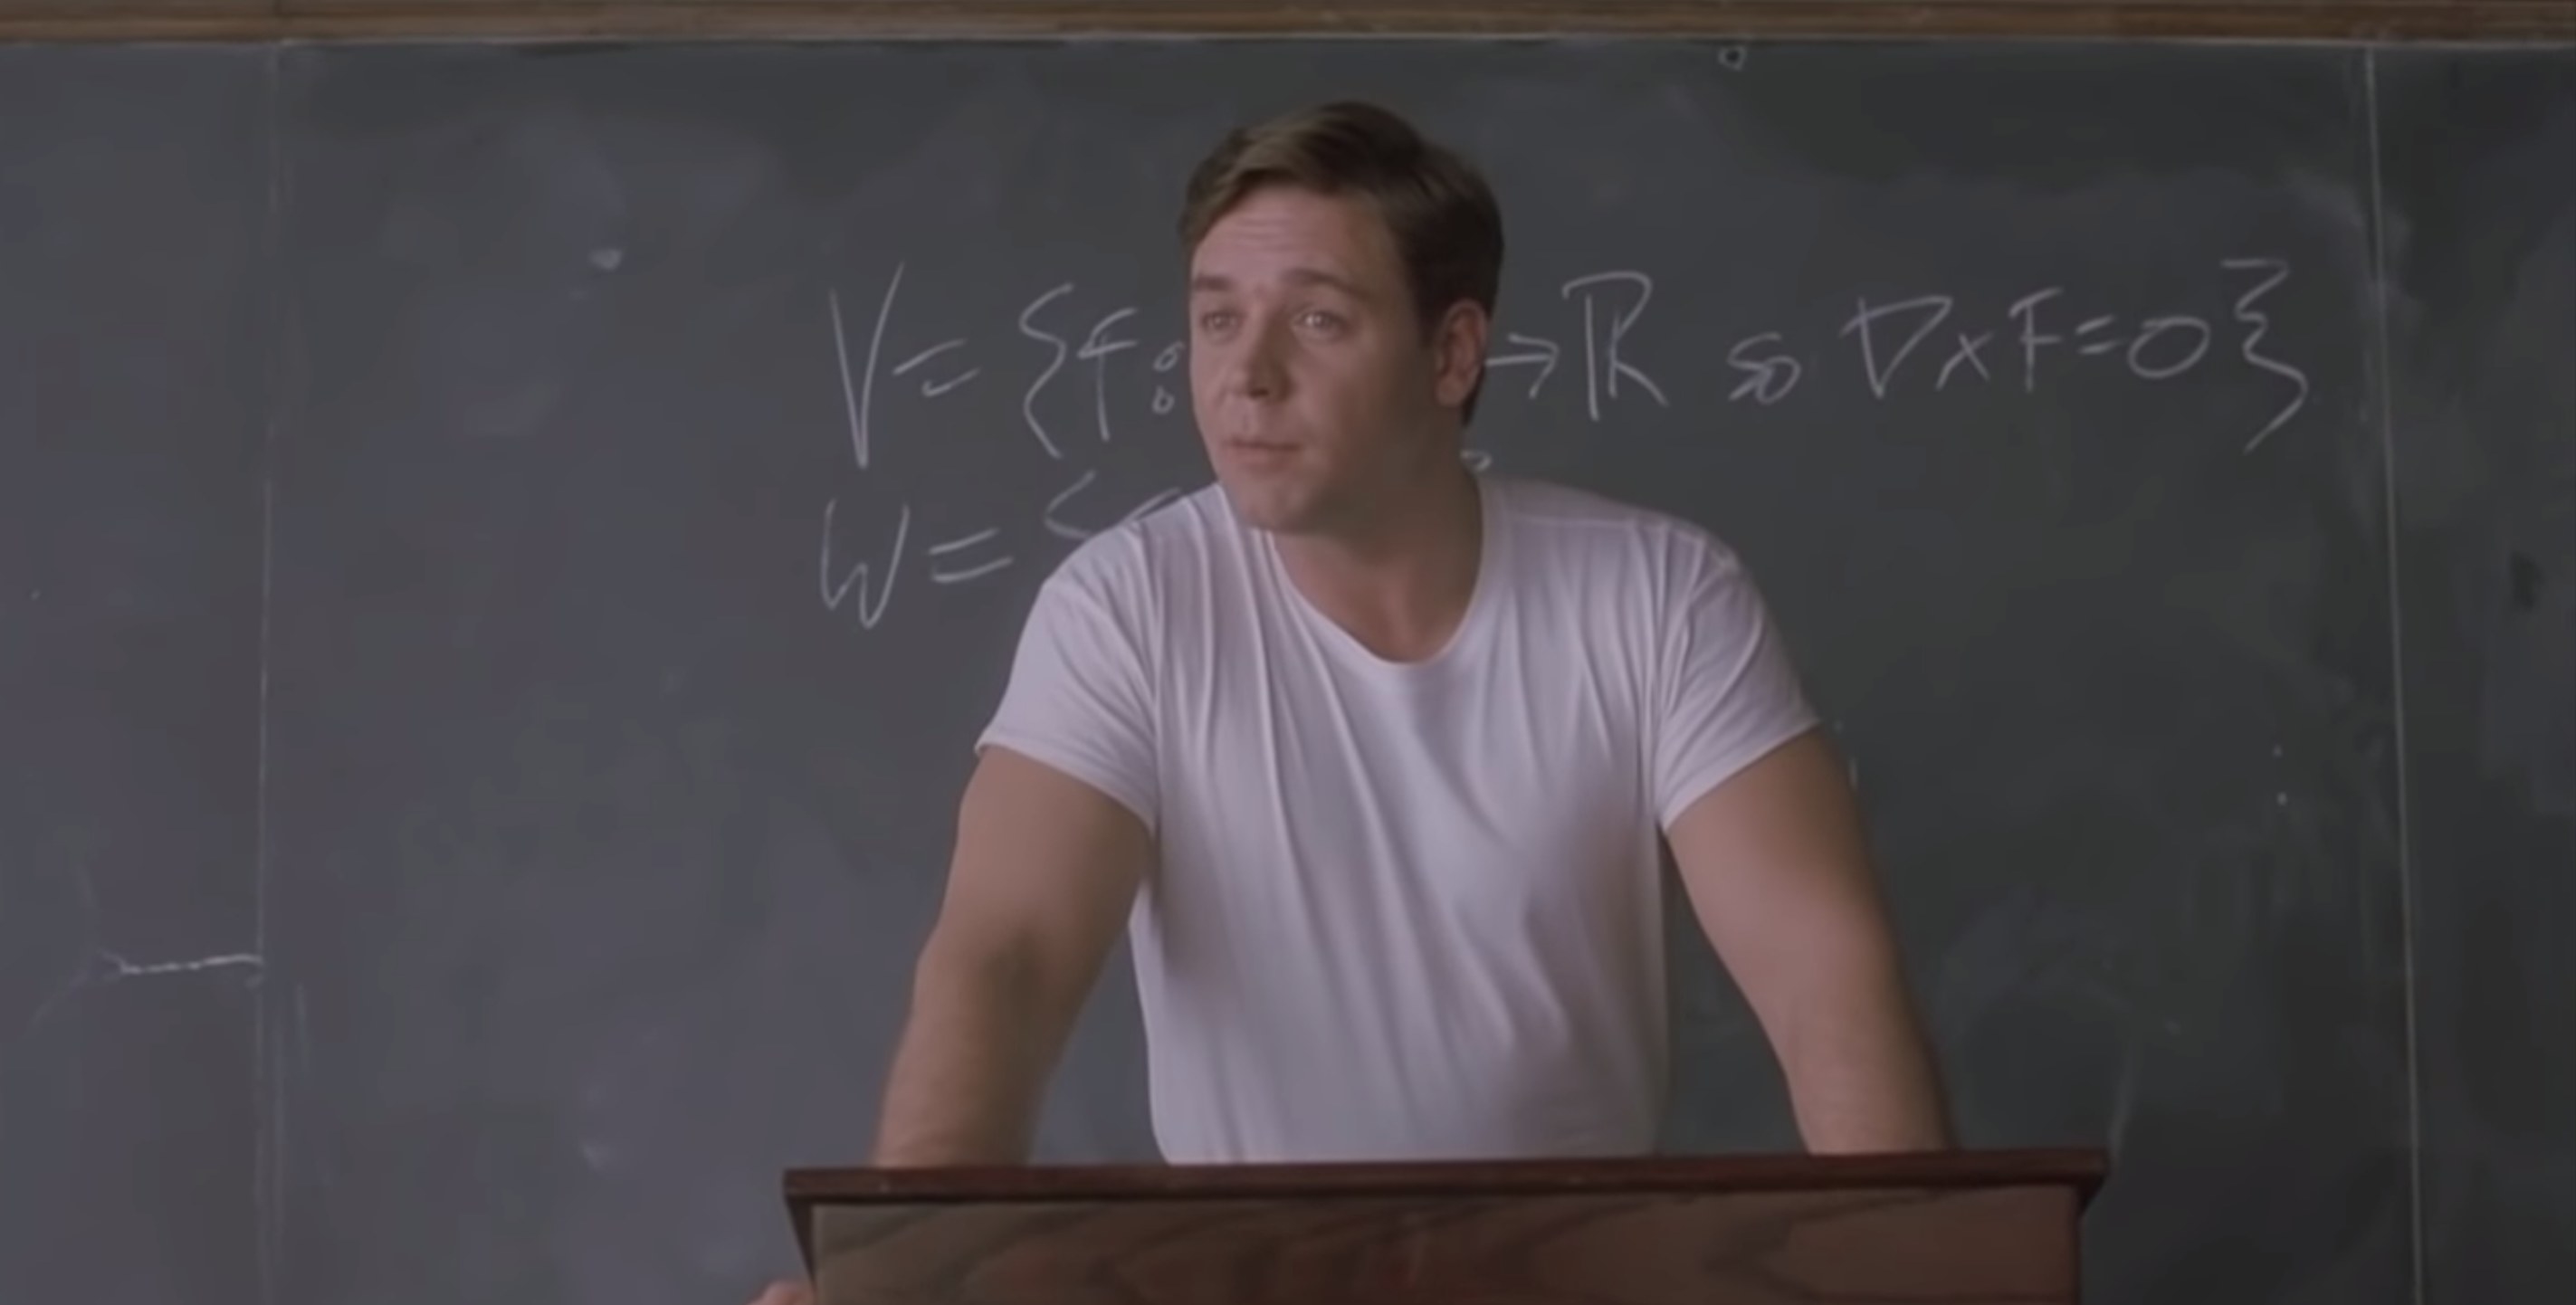 A young Russell Crowe standing in front of a chalkboard 